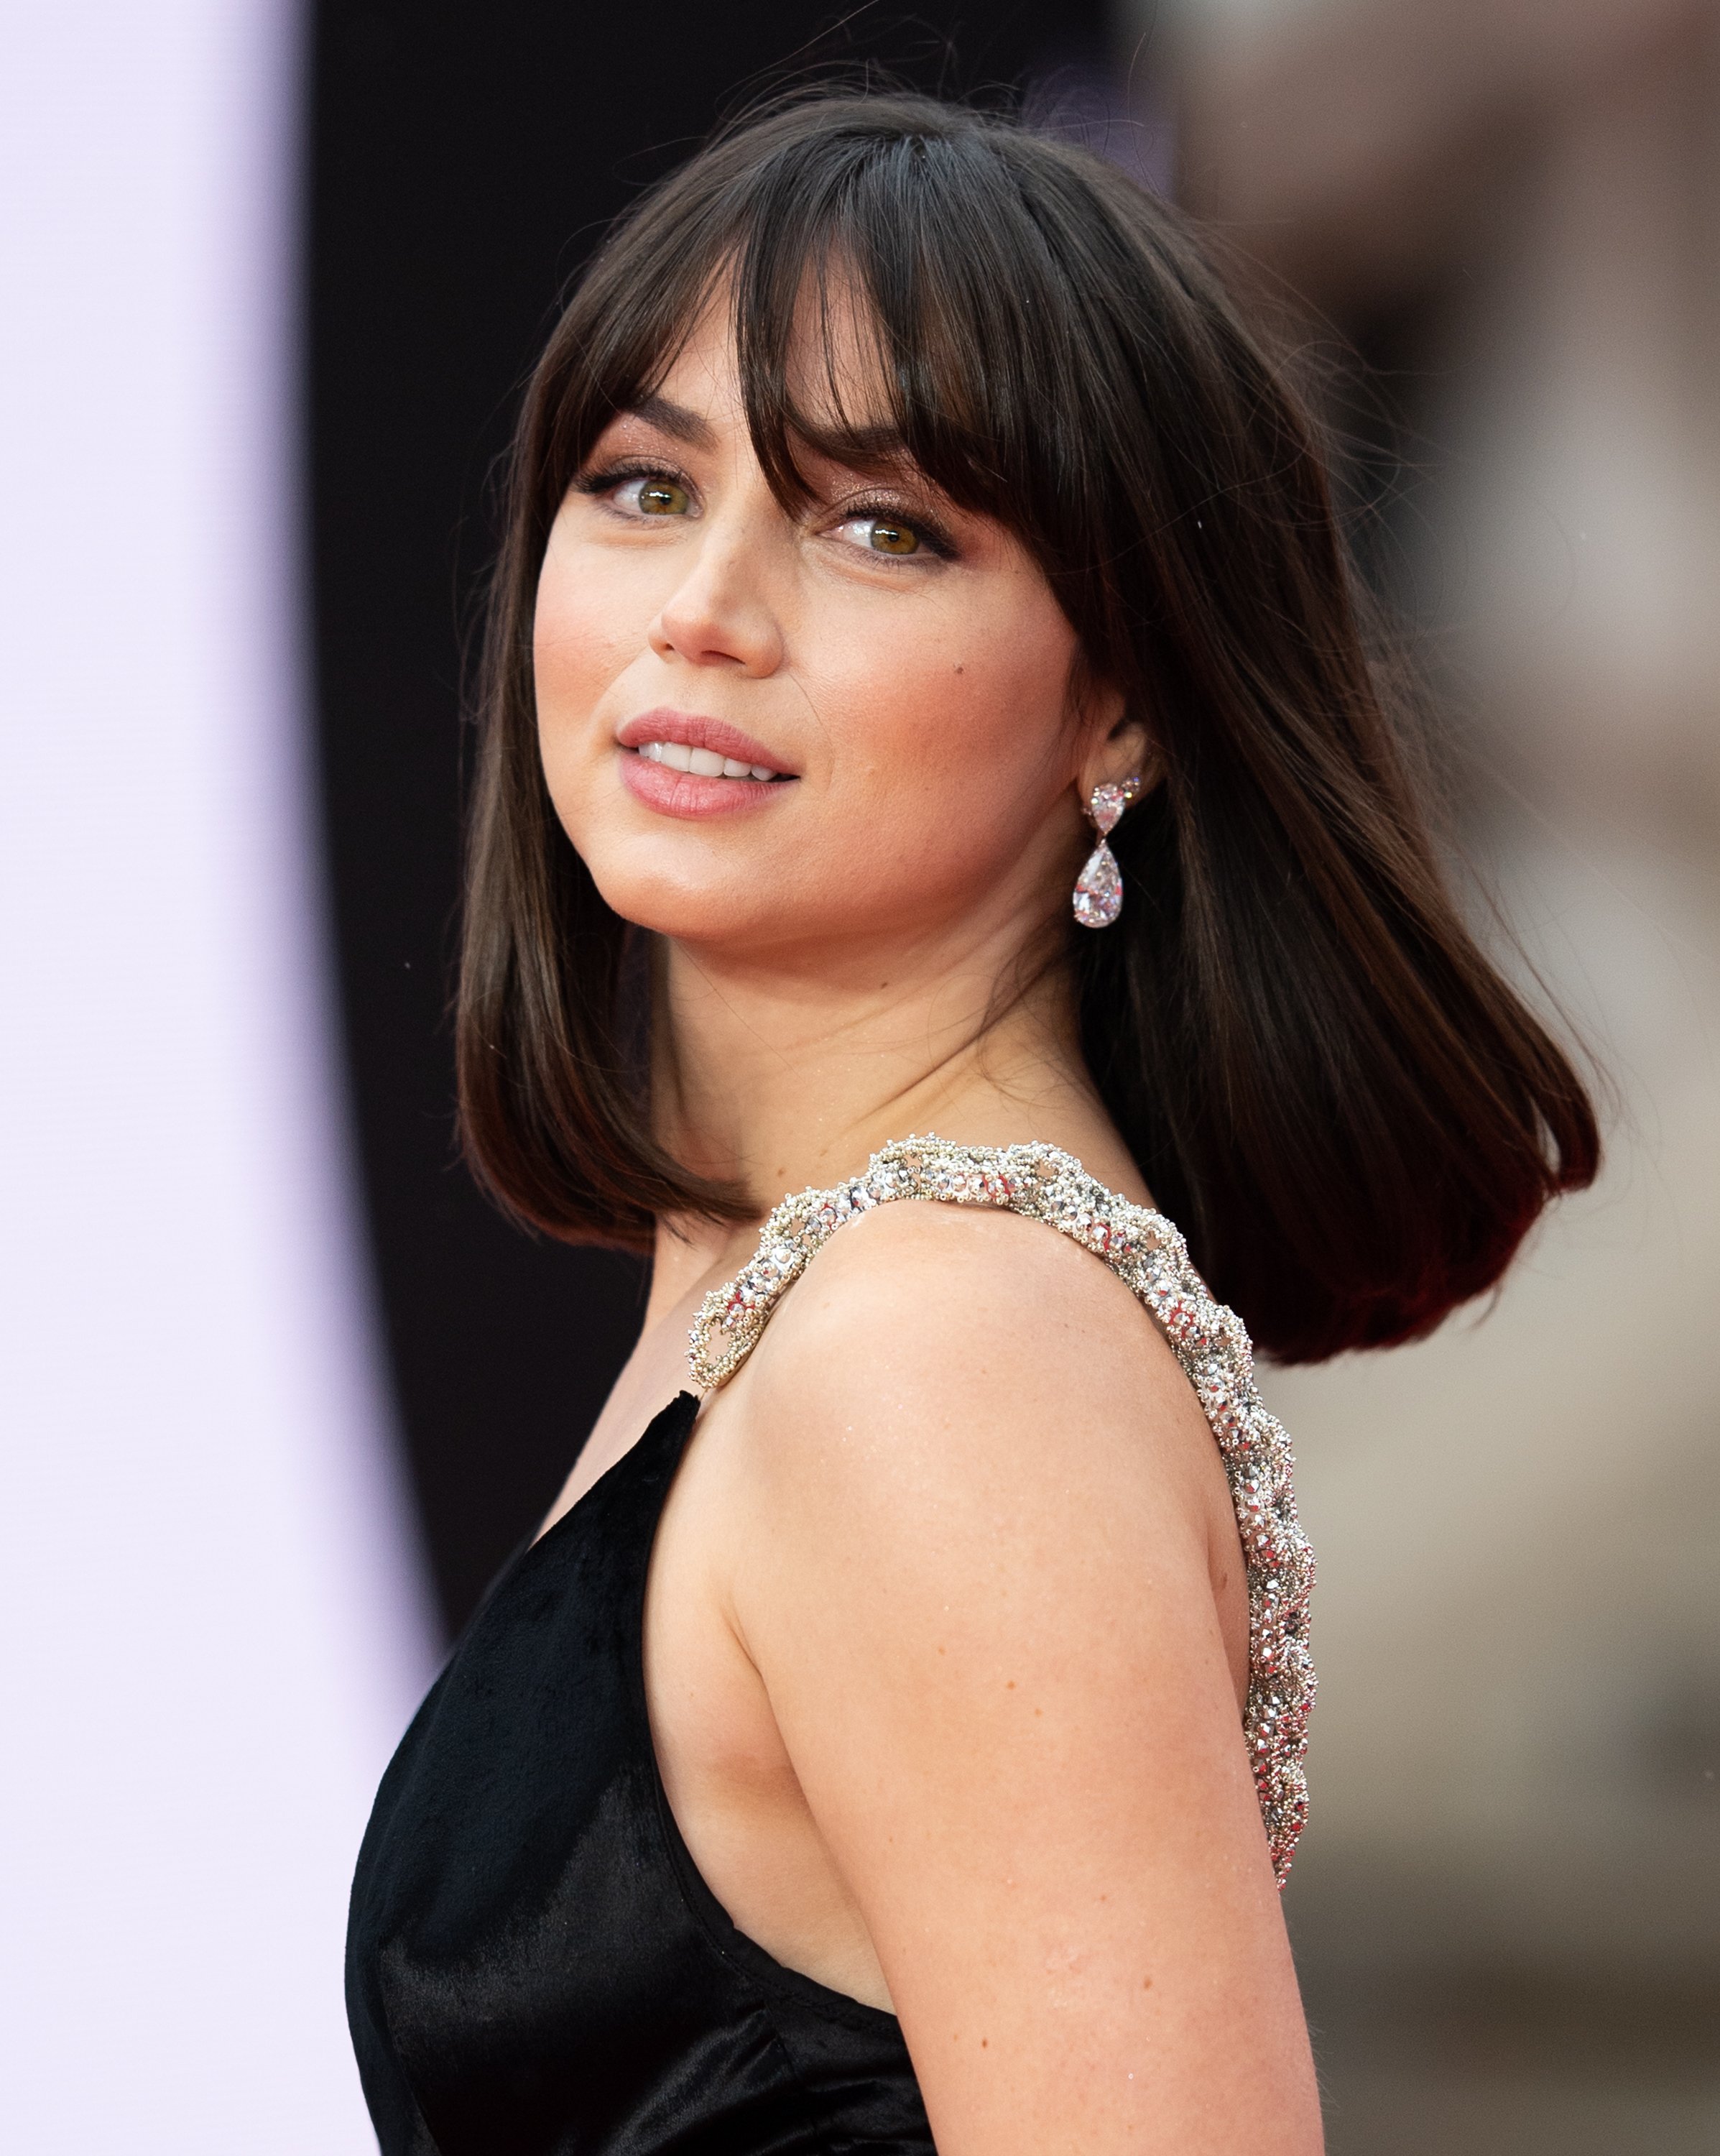 Ana de Armas attends the "No Time To Die" World Premiere at Royal Albert Hall on September 28, 2021, in London, England. | Source: Getty Images